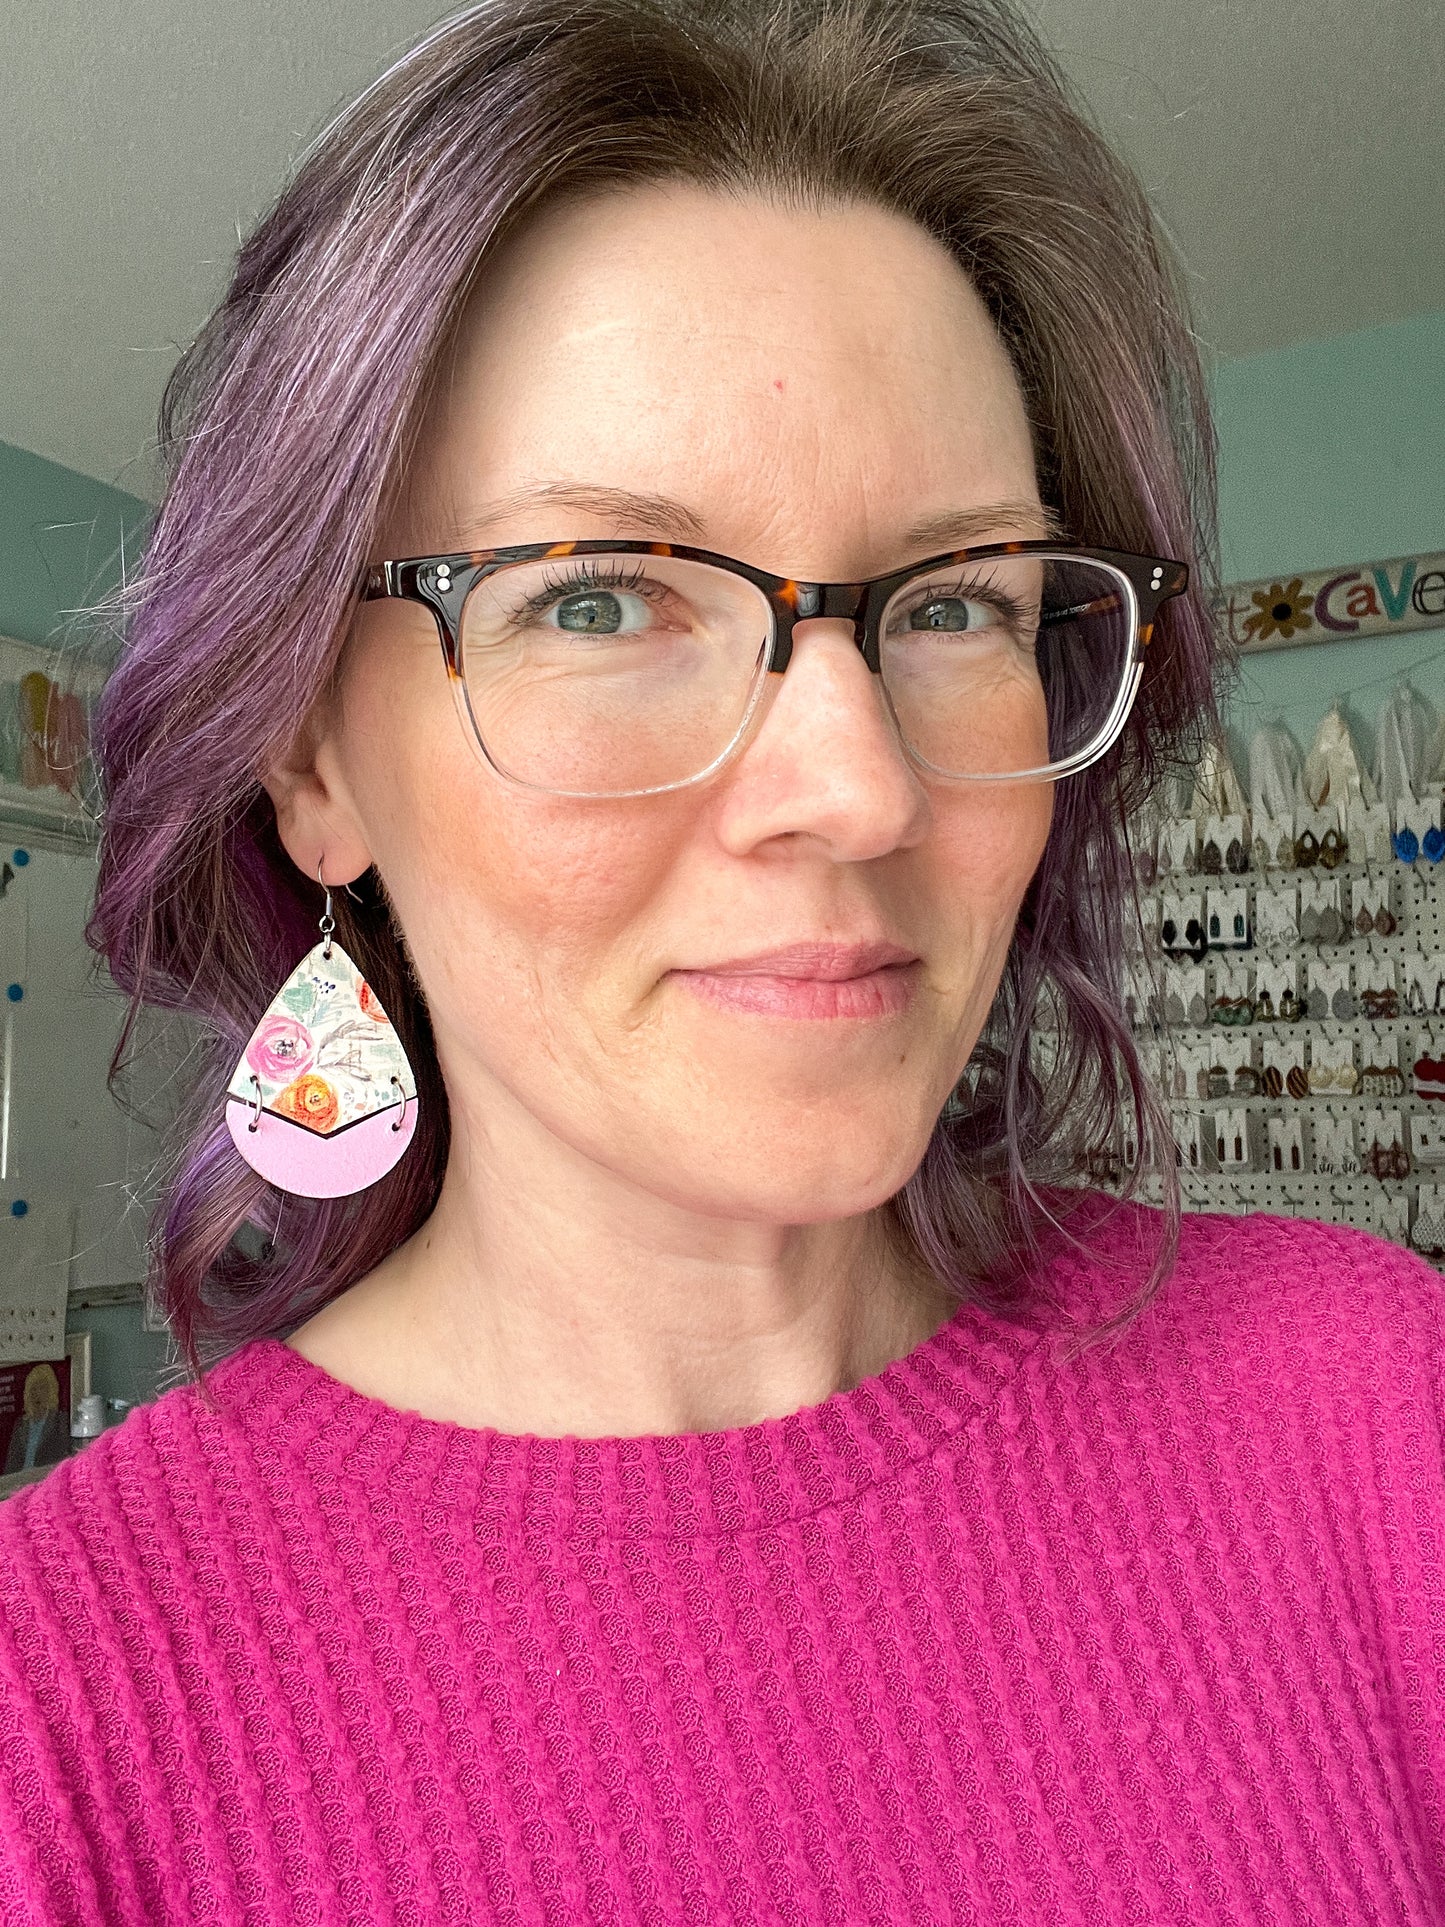 Peony & Floral Cork on Leather Earrings: Choose From 3 Styles